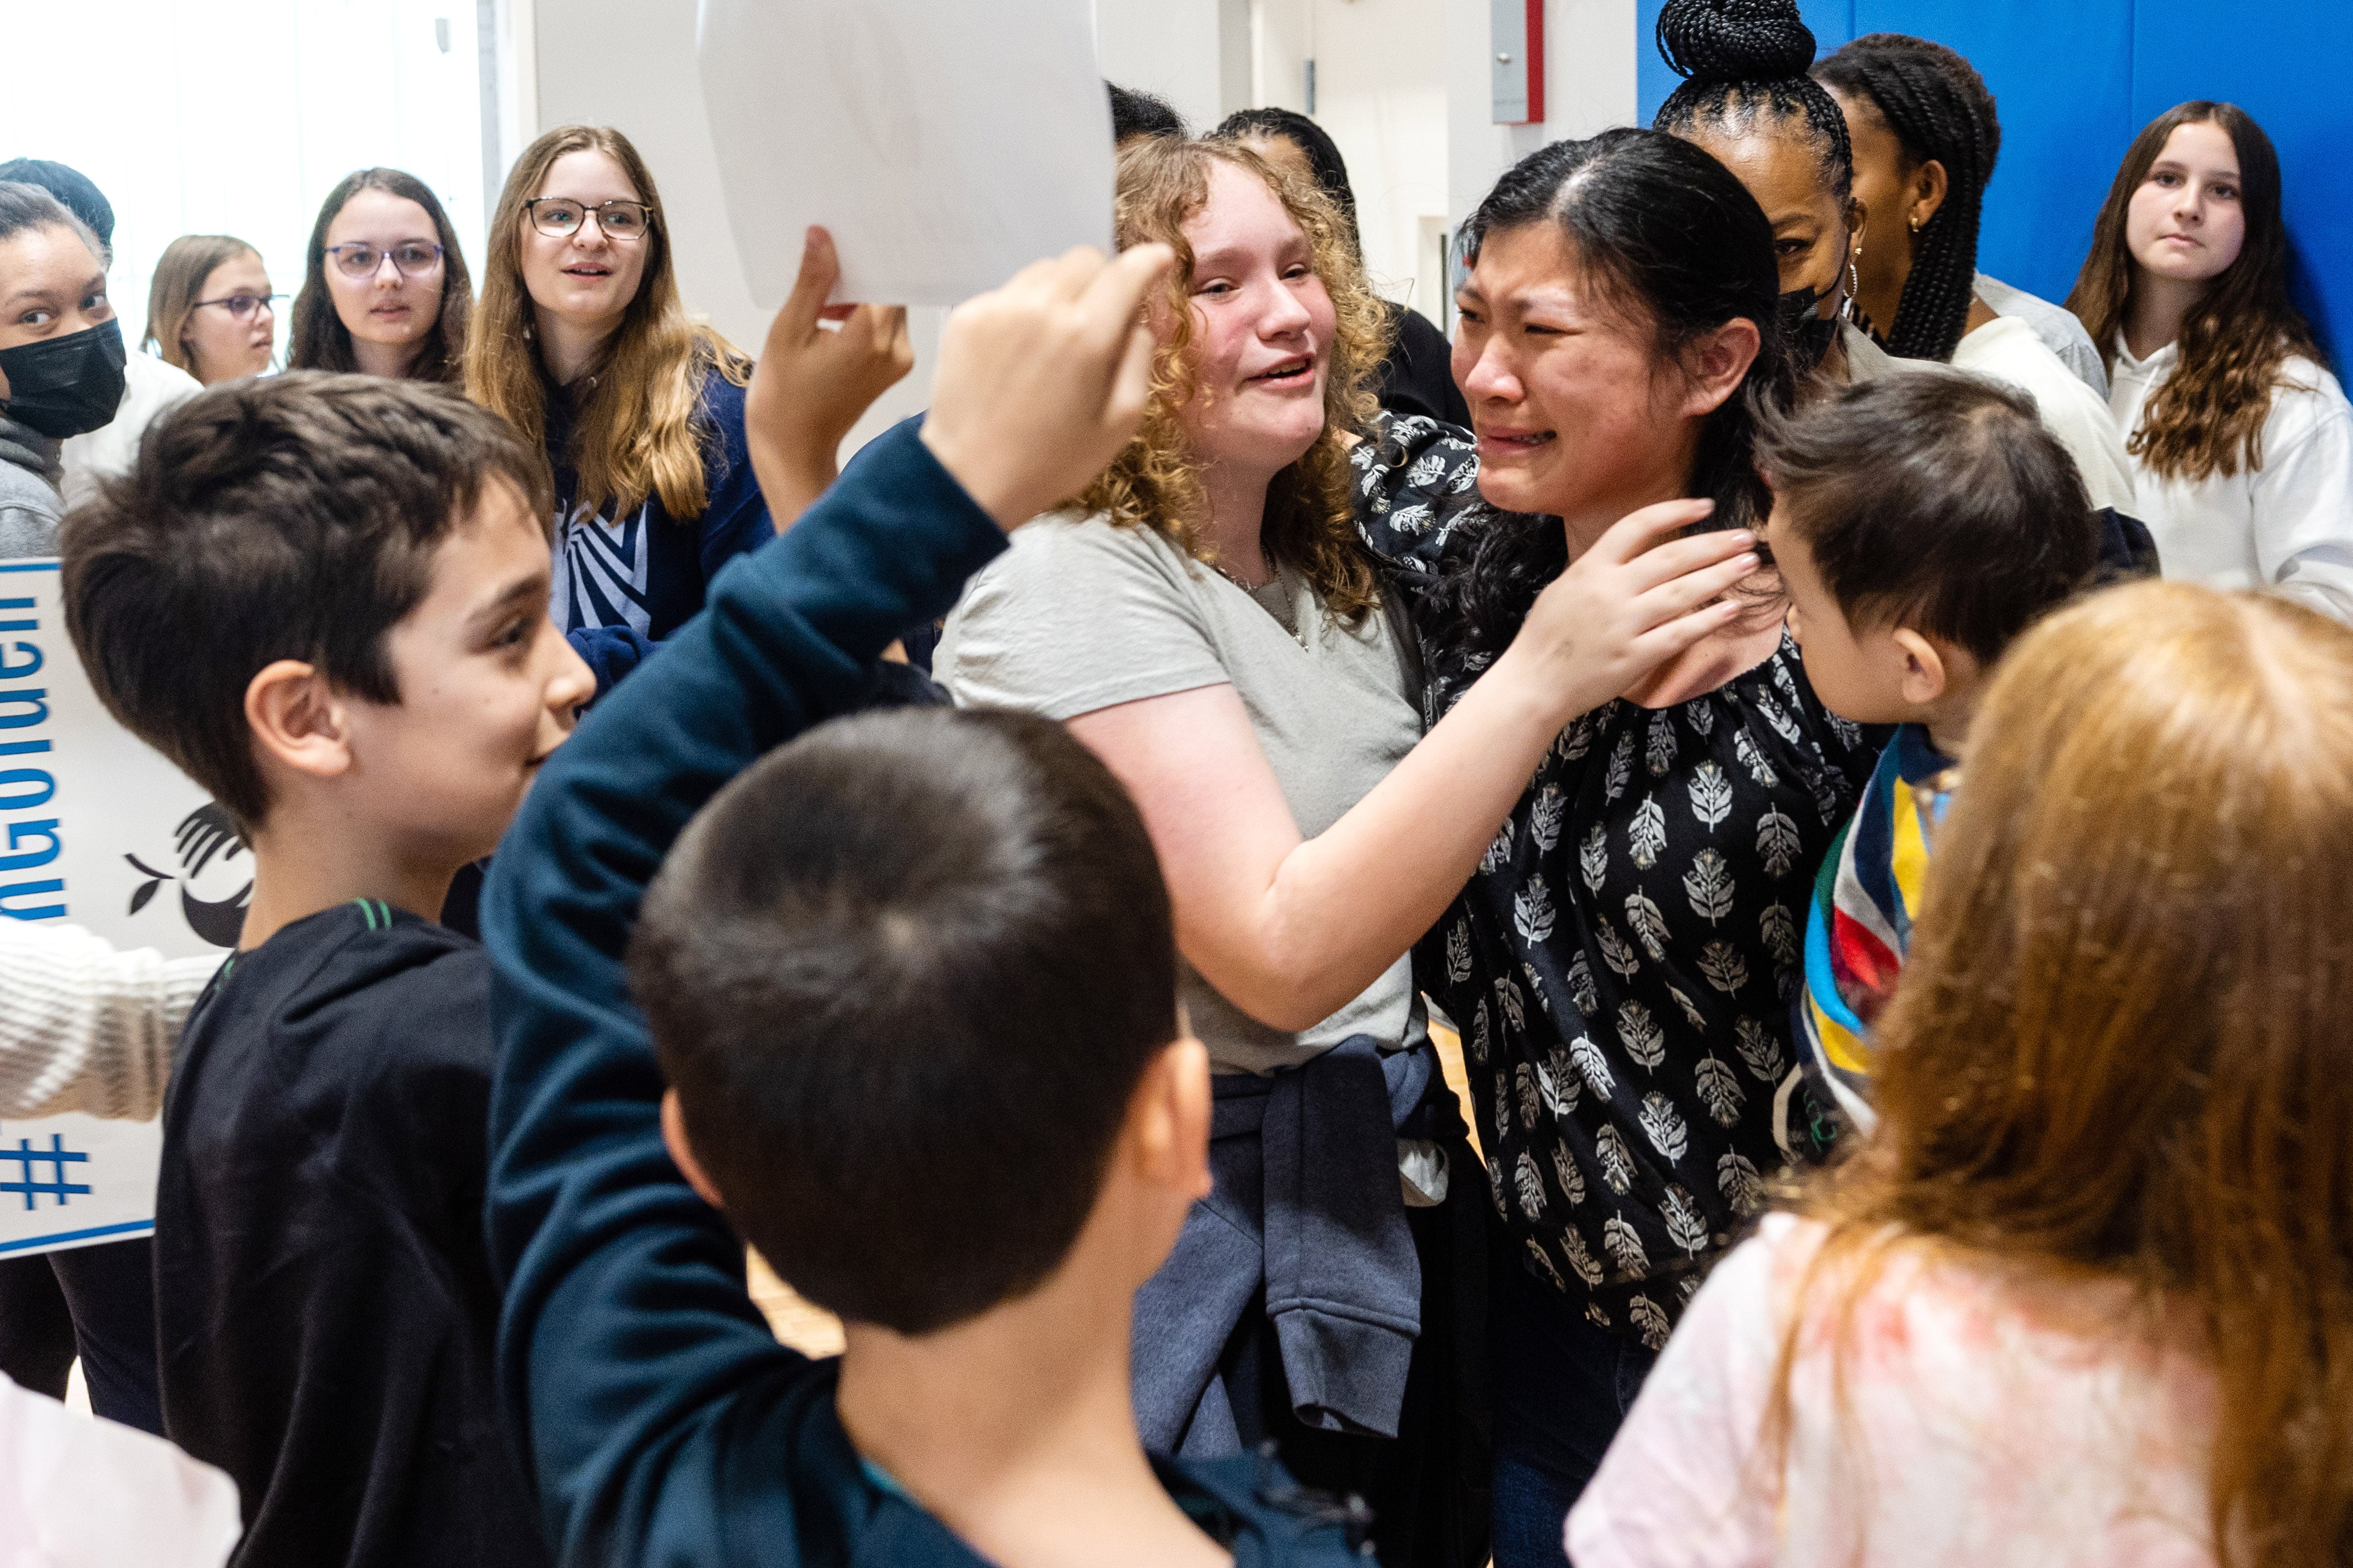 A woman in a black top cries and is hugged and surrounded by students